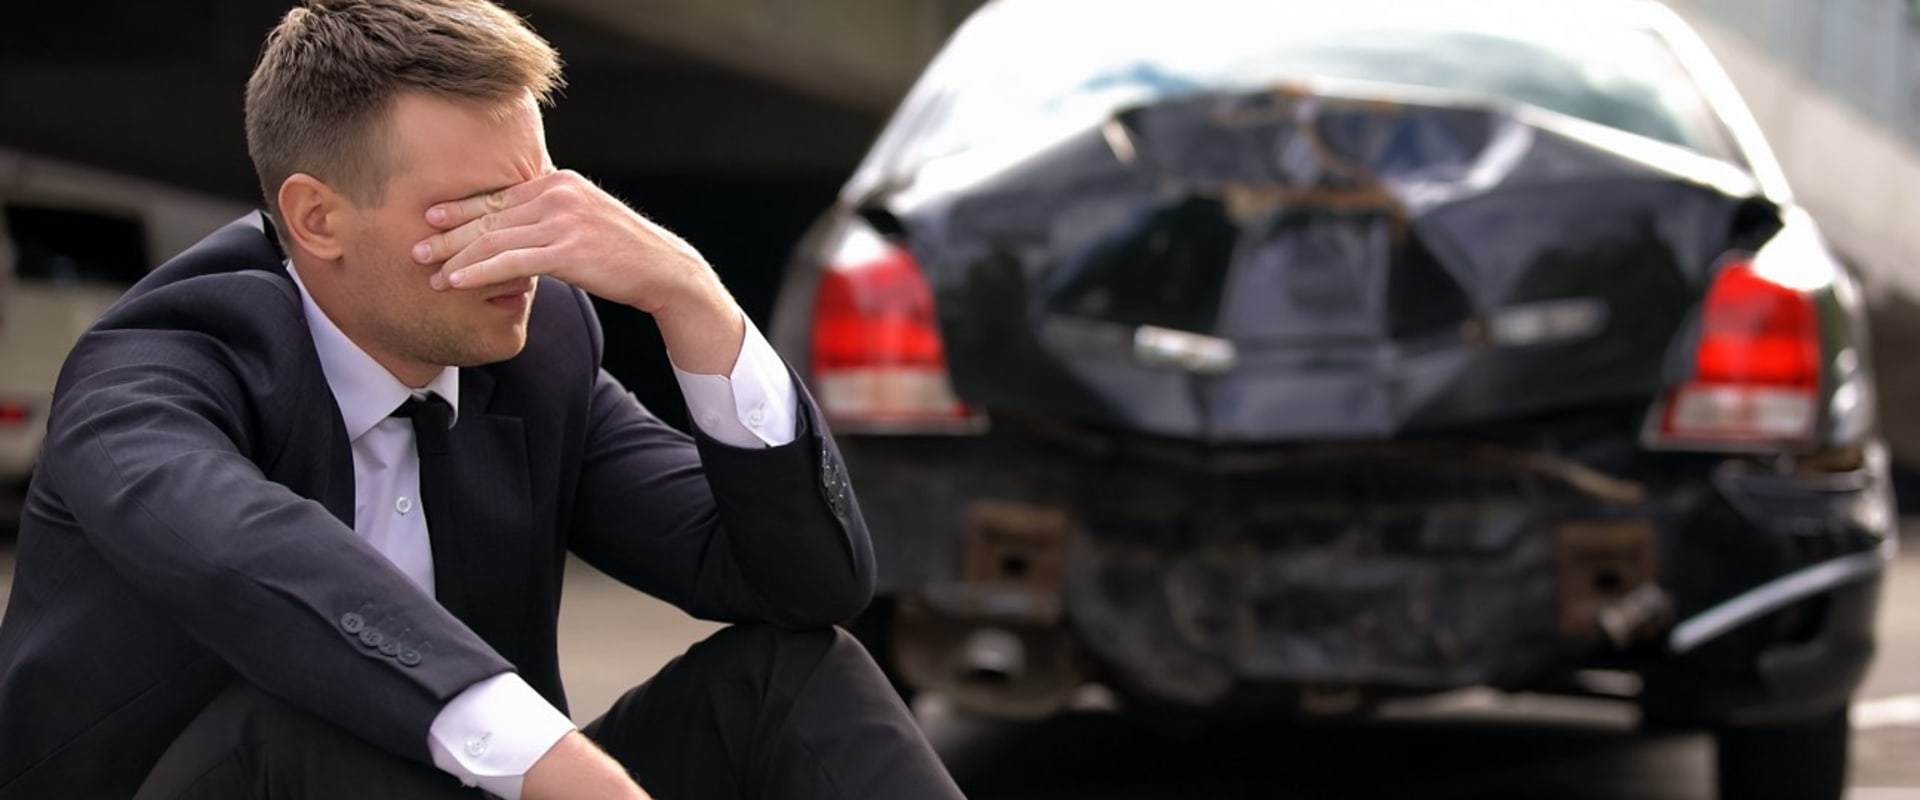 The Importance of Choosing a Qualified Attorney for Your Auto Accident Case in New Jersey